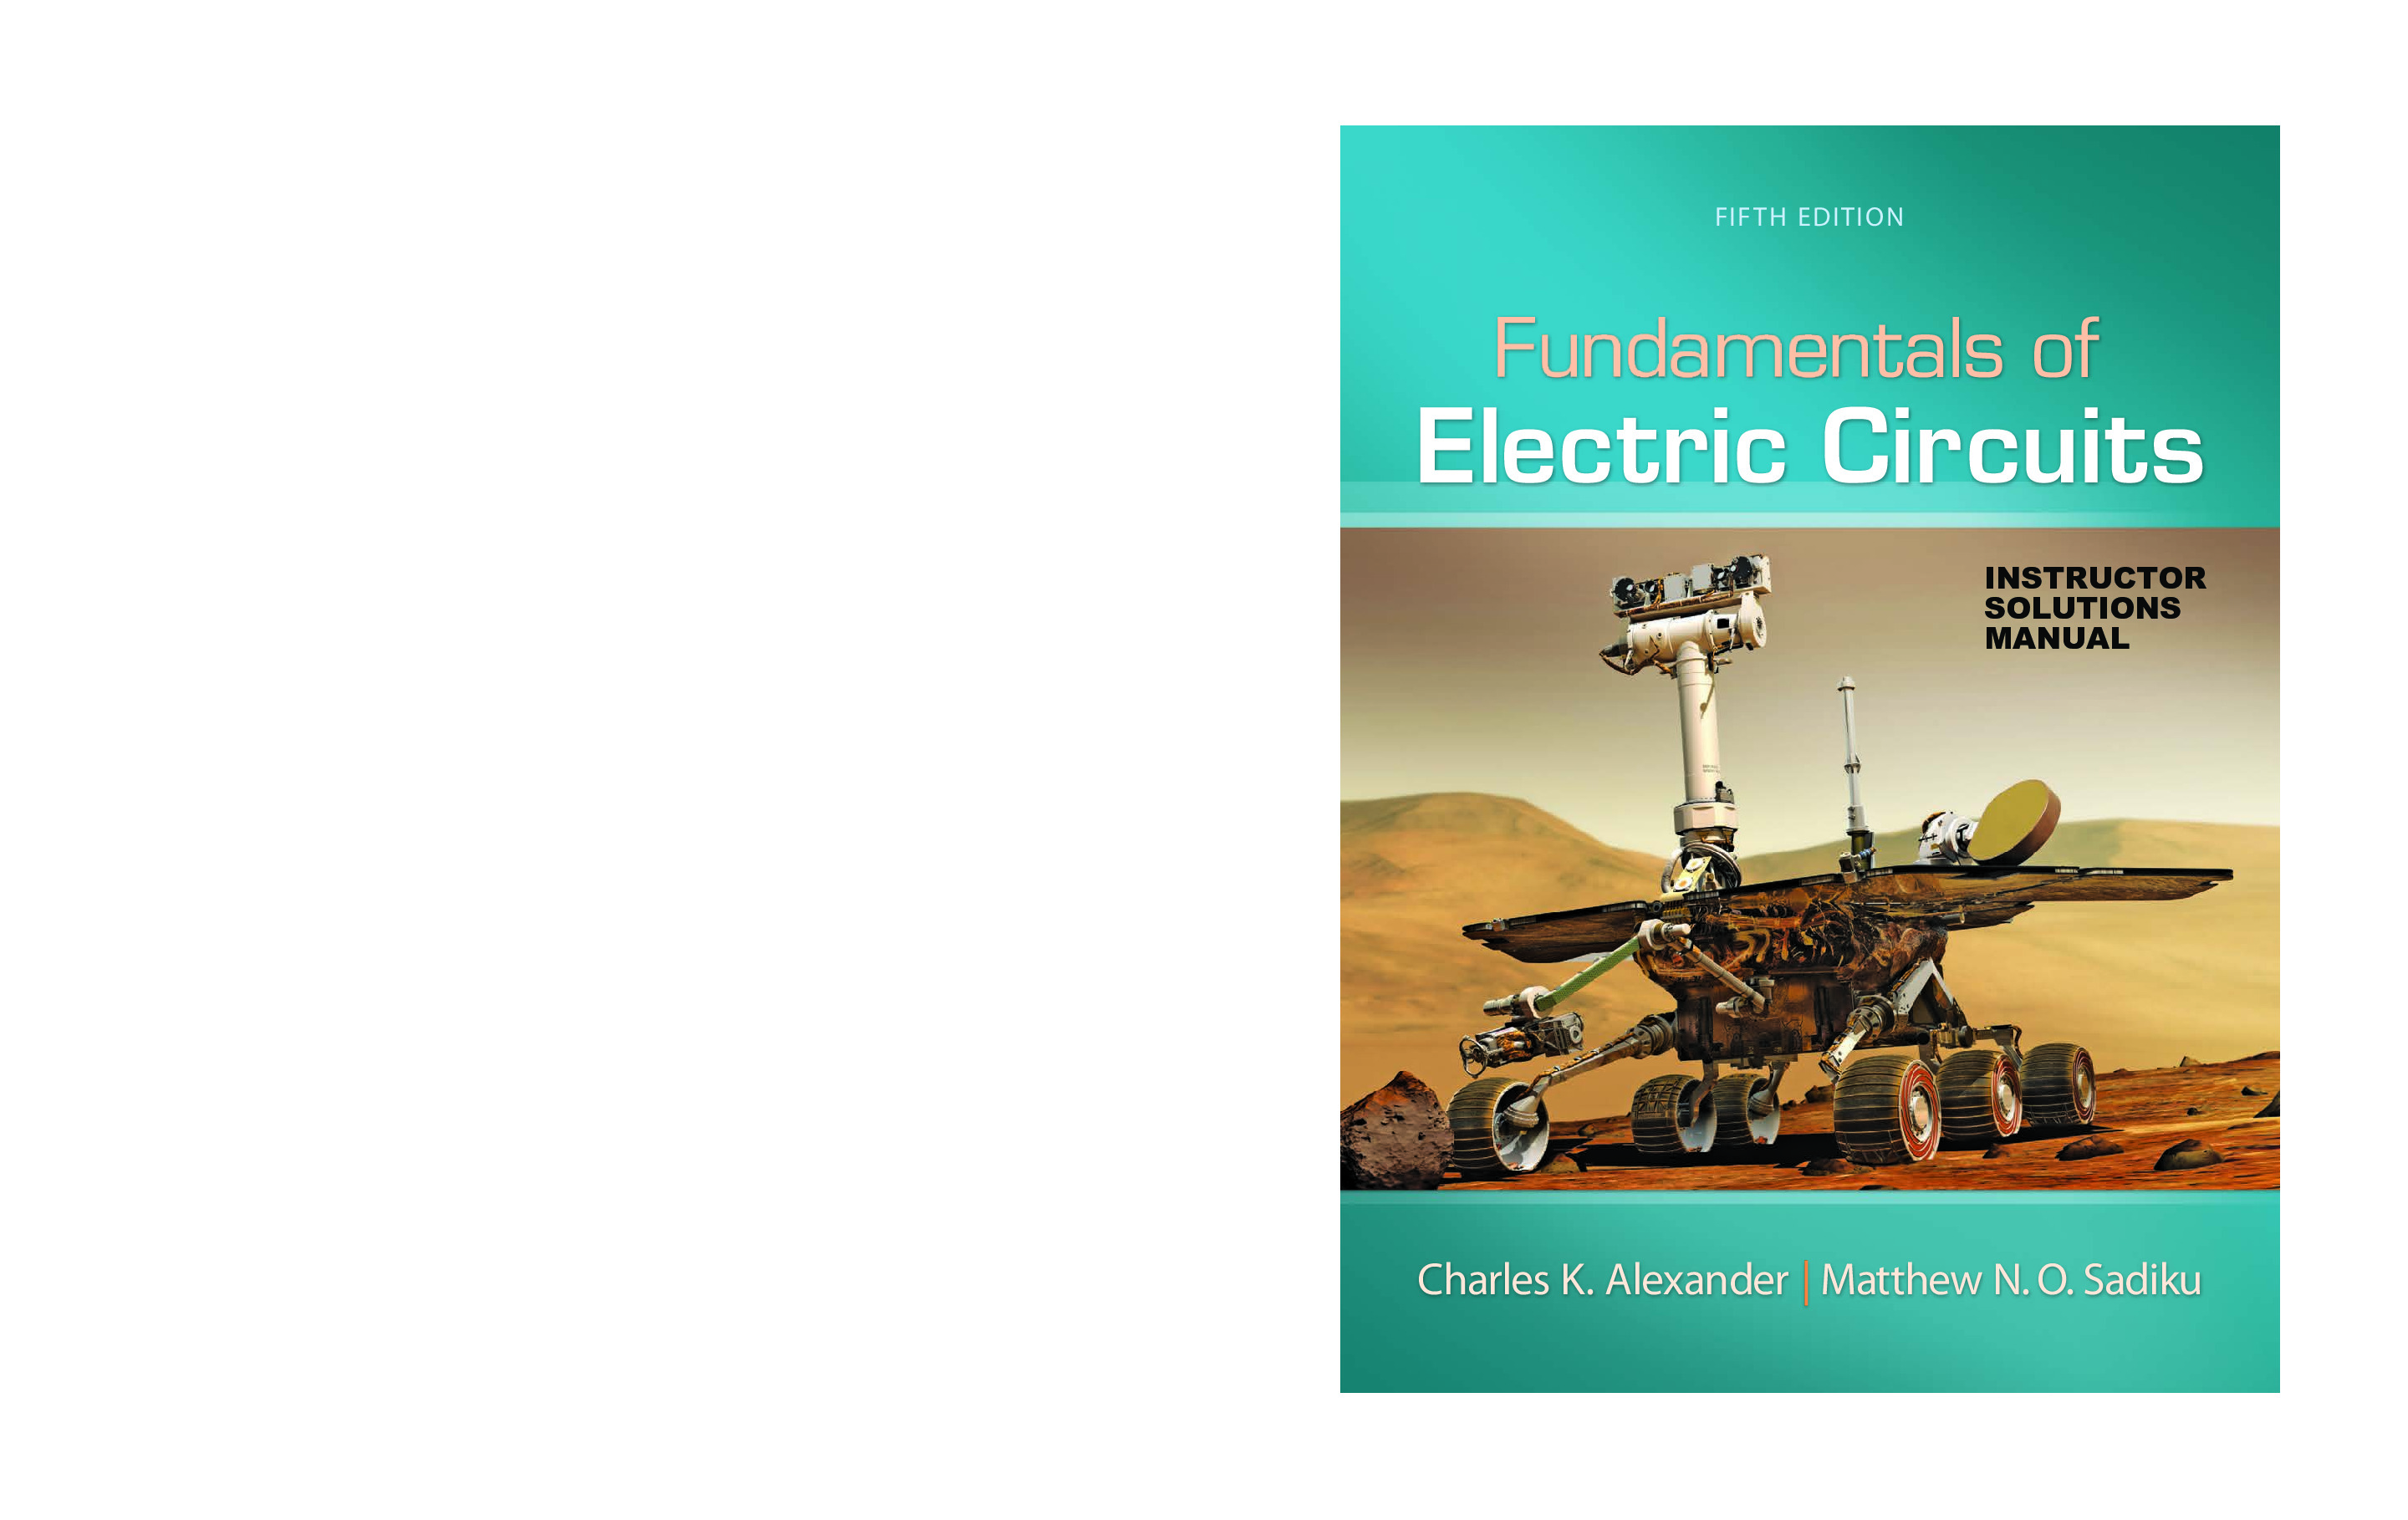 Fundamentals-of-Electric-Circuits-Instructor-Solutions-Manual(5th-Edition)